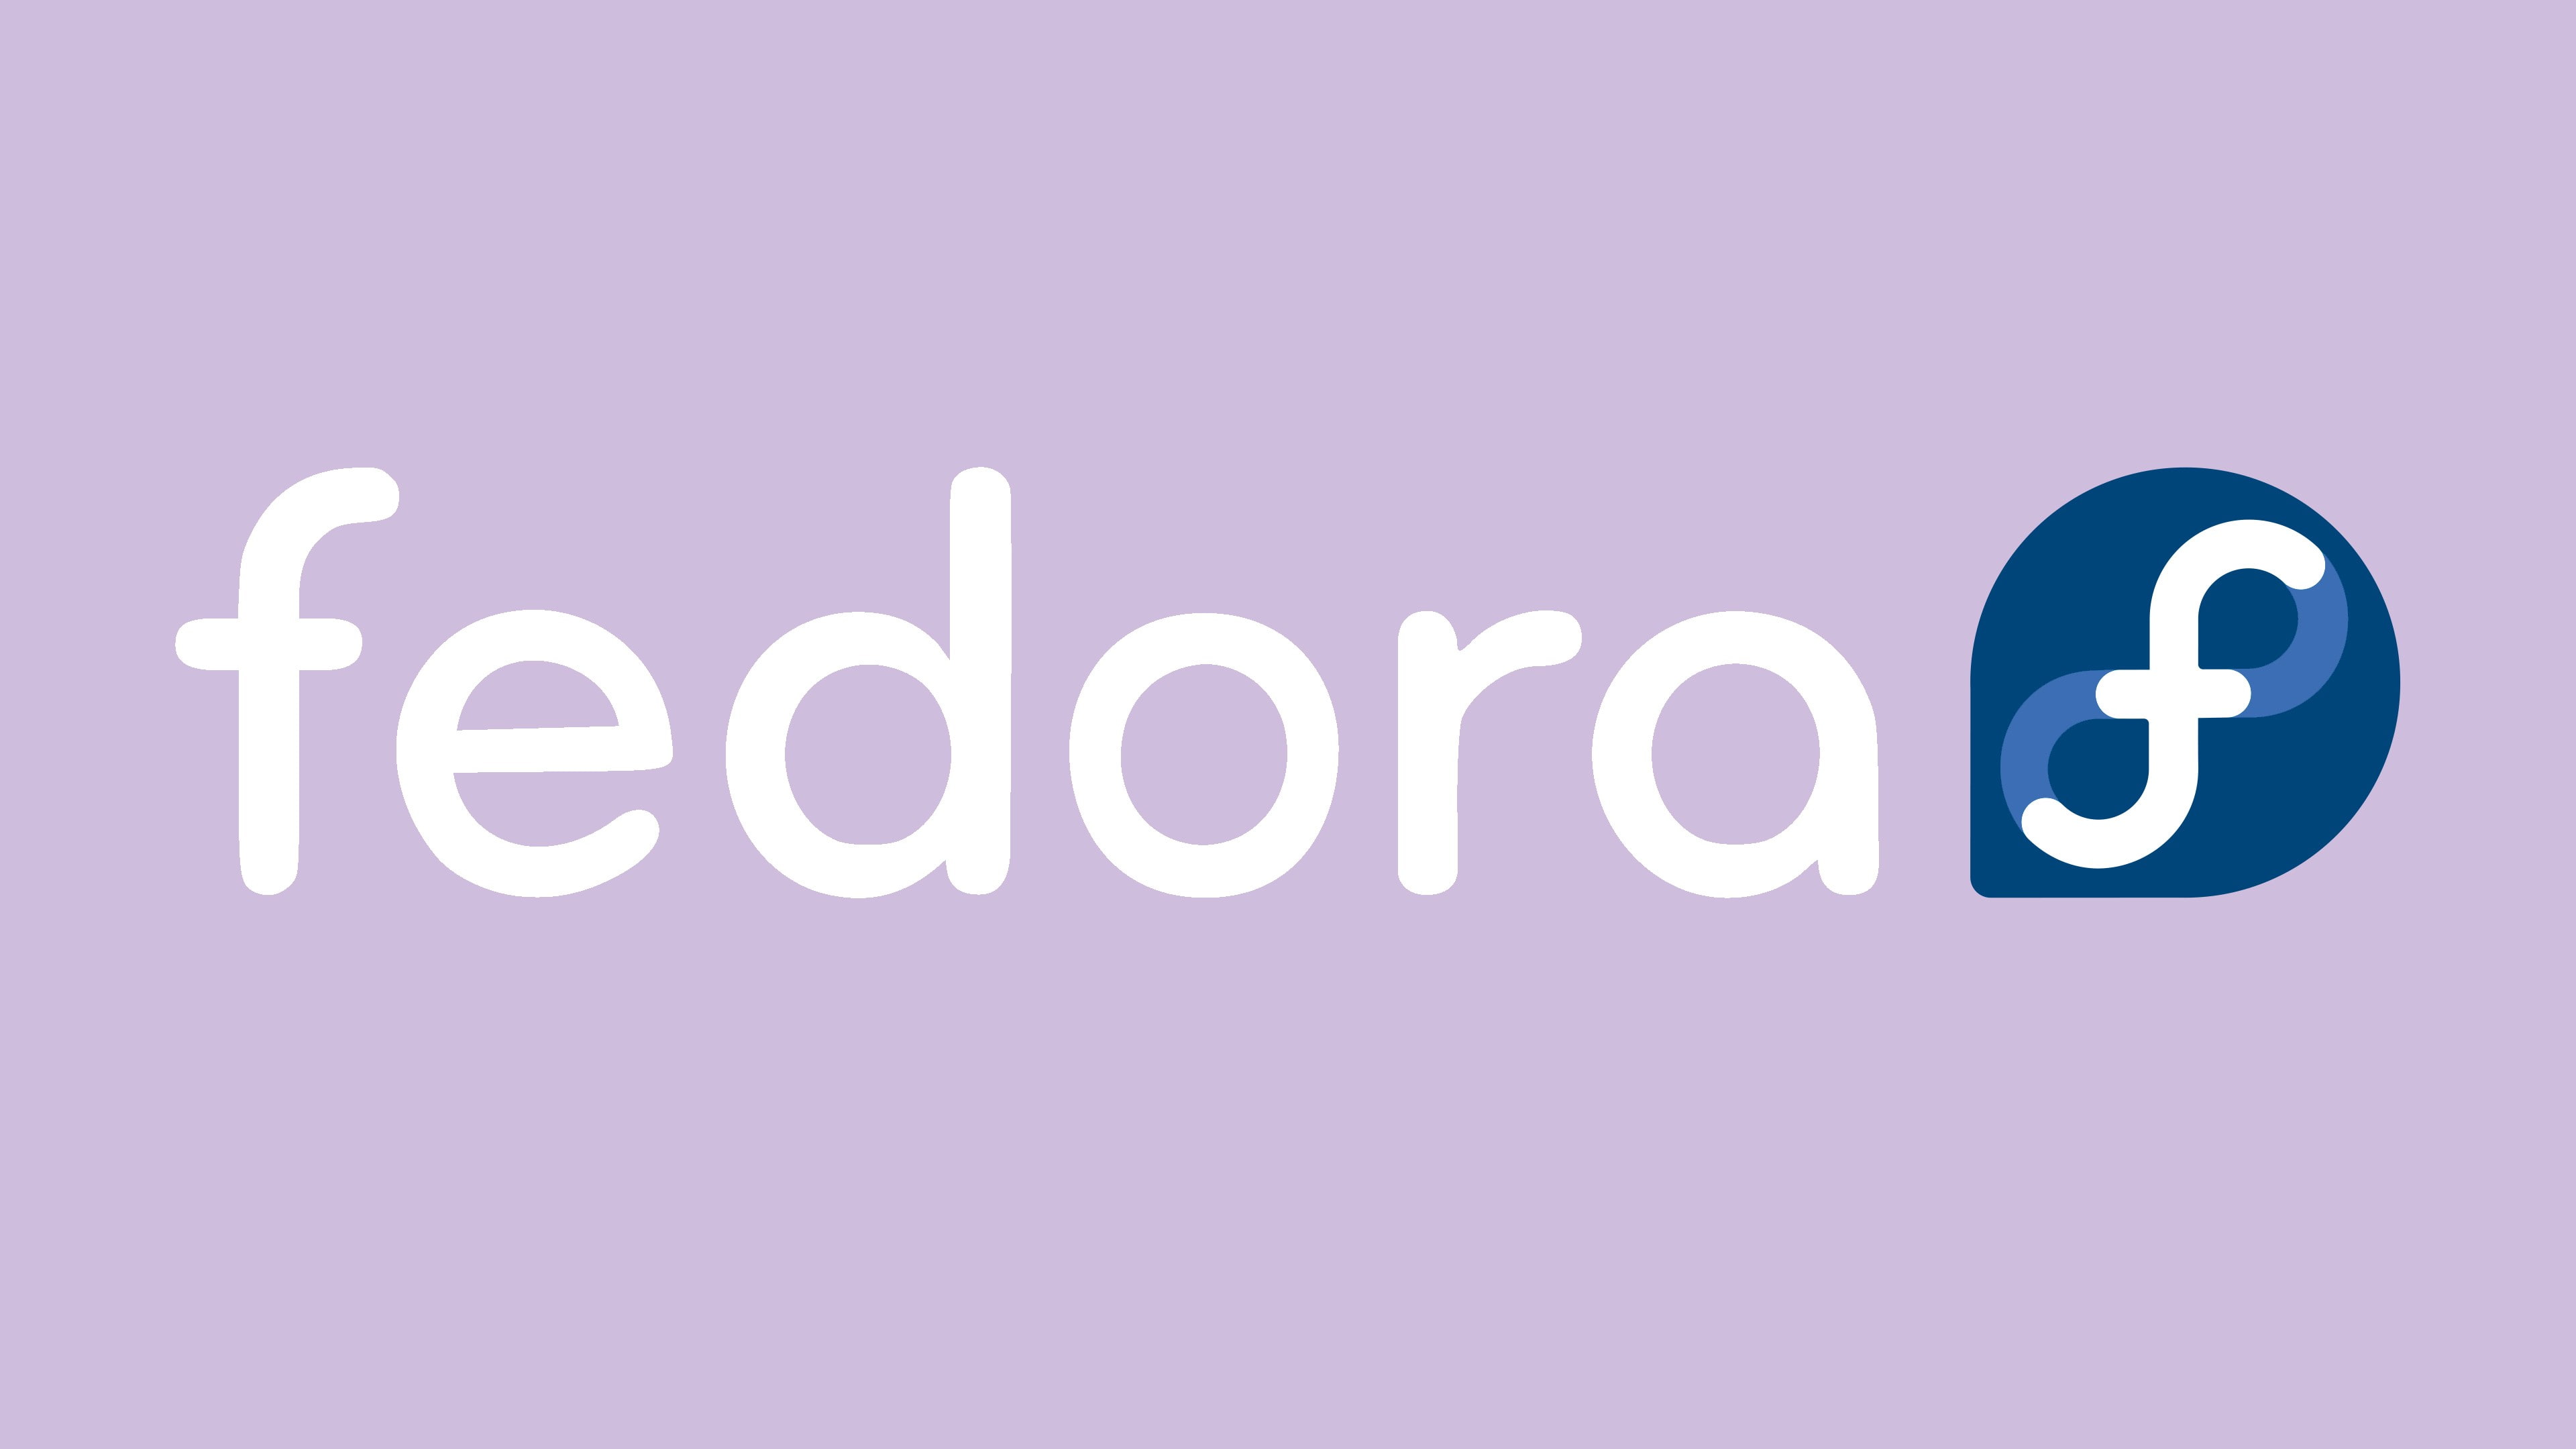 Fedora, Linux, open-source, open source, operating system, logo